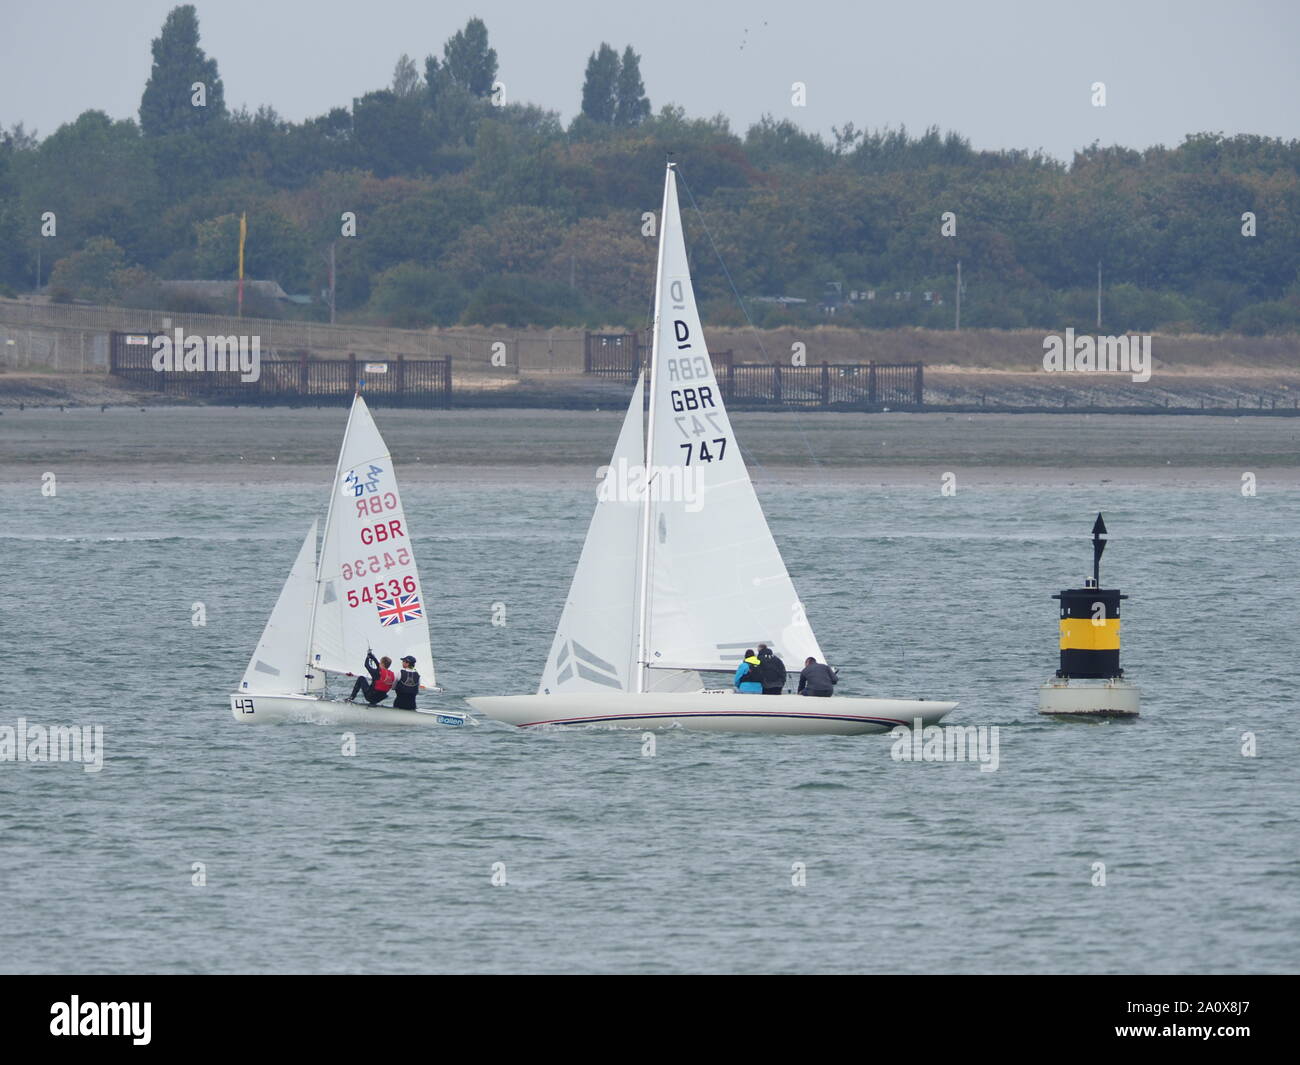 Queenborough, Kent, UK. 22nd September, 2019. 56th Medway Marathon - an annual 26 mile course on the tidal River Medway organised by Medway Yacht Club and open to both keelboats and sailing dinghies. The course starts at Upnor Rochester, and utilises various creeks on the Medway to make up the distance with the Queenborough Spit Buoy at the eastern extreme of the course. Pic: a 420 dinghy rounds the Queenborough Spit buoy ahead of a 3-person  Dragon keelboat. Credit: James Bell/Alamy Live News Stock Photo